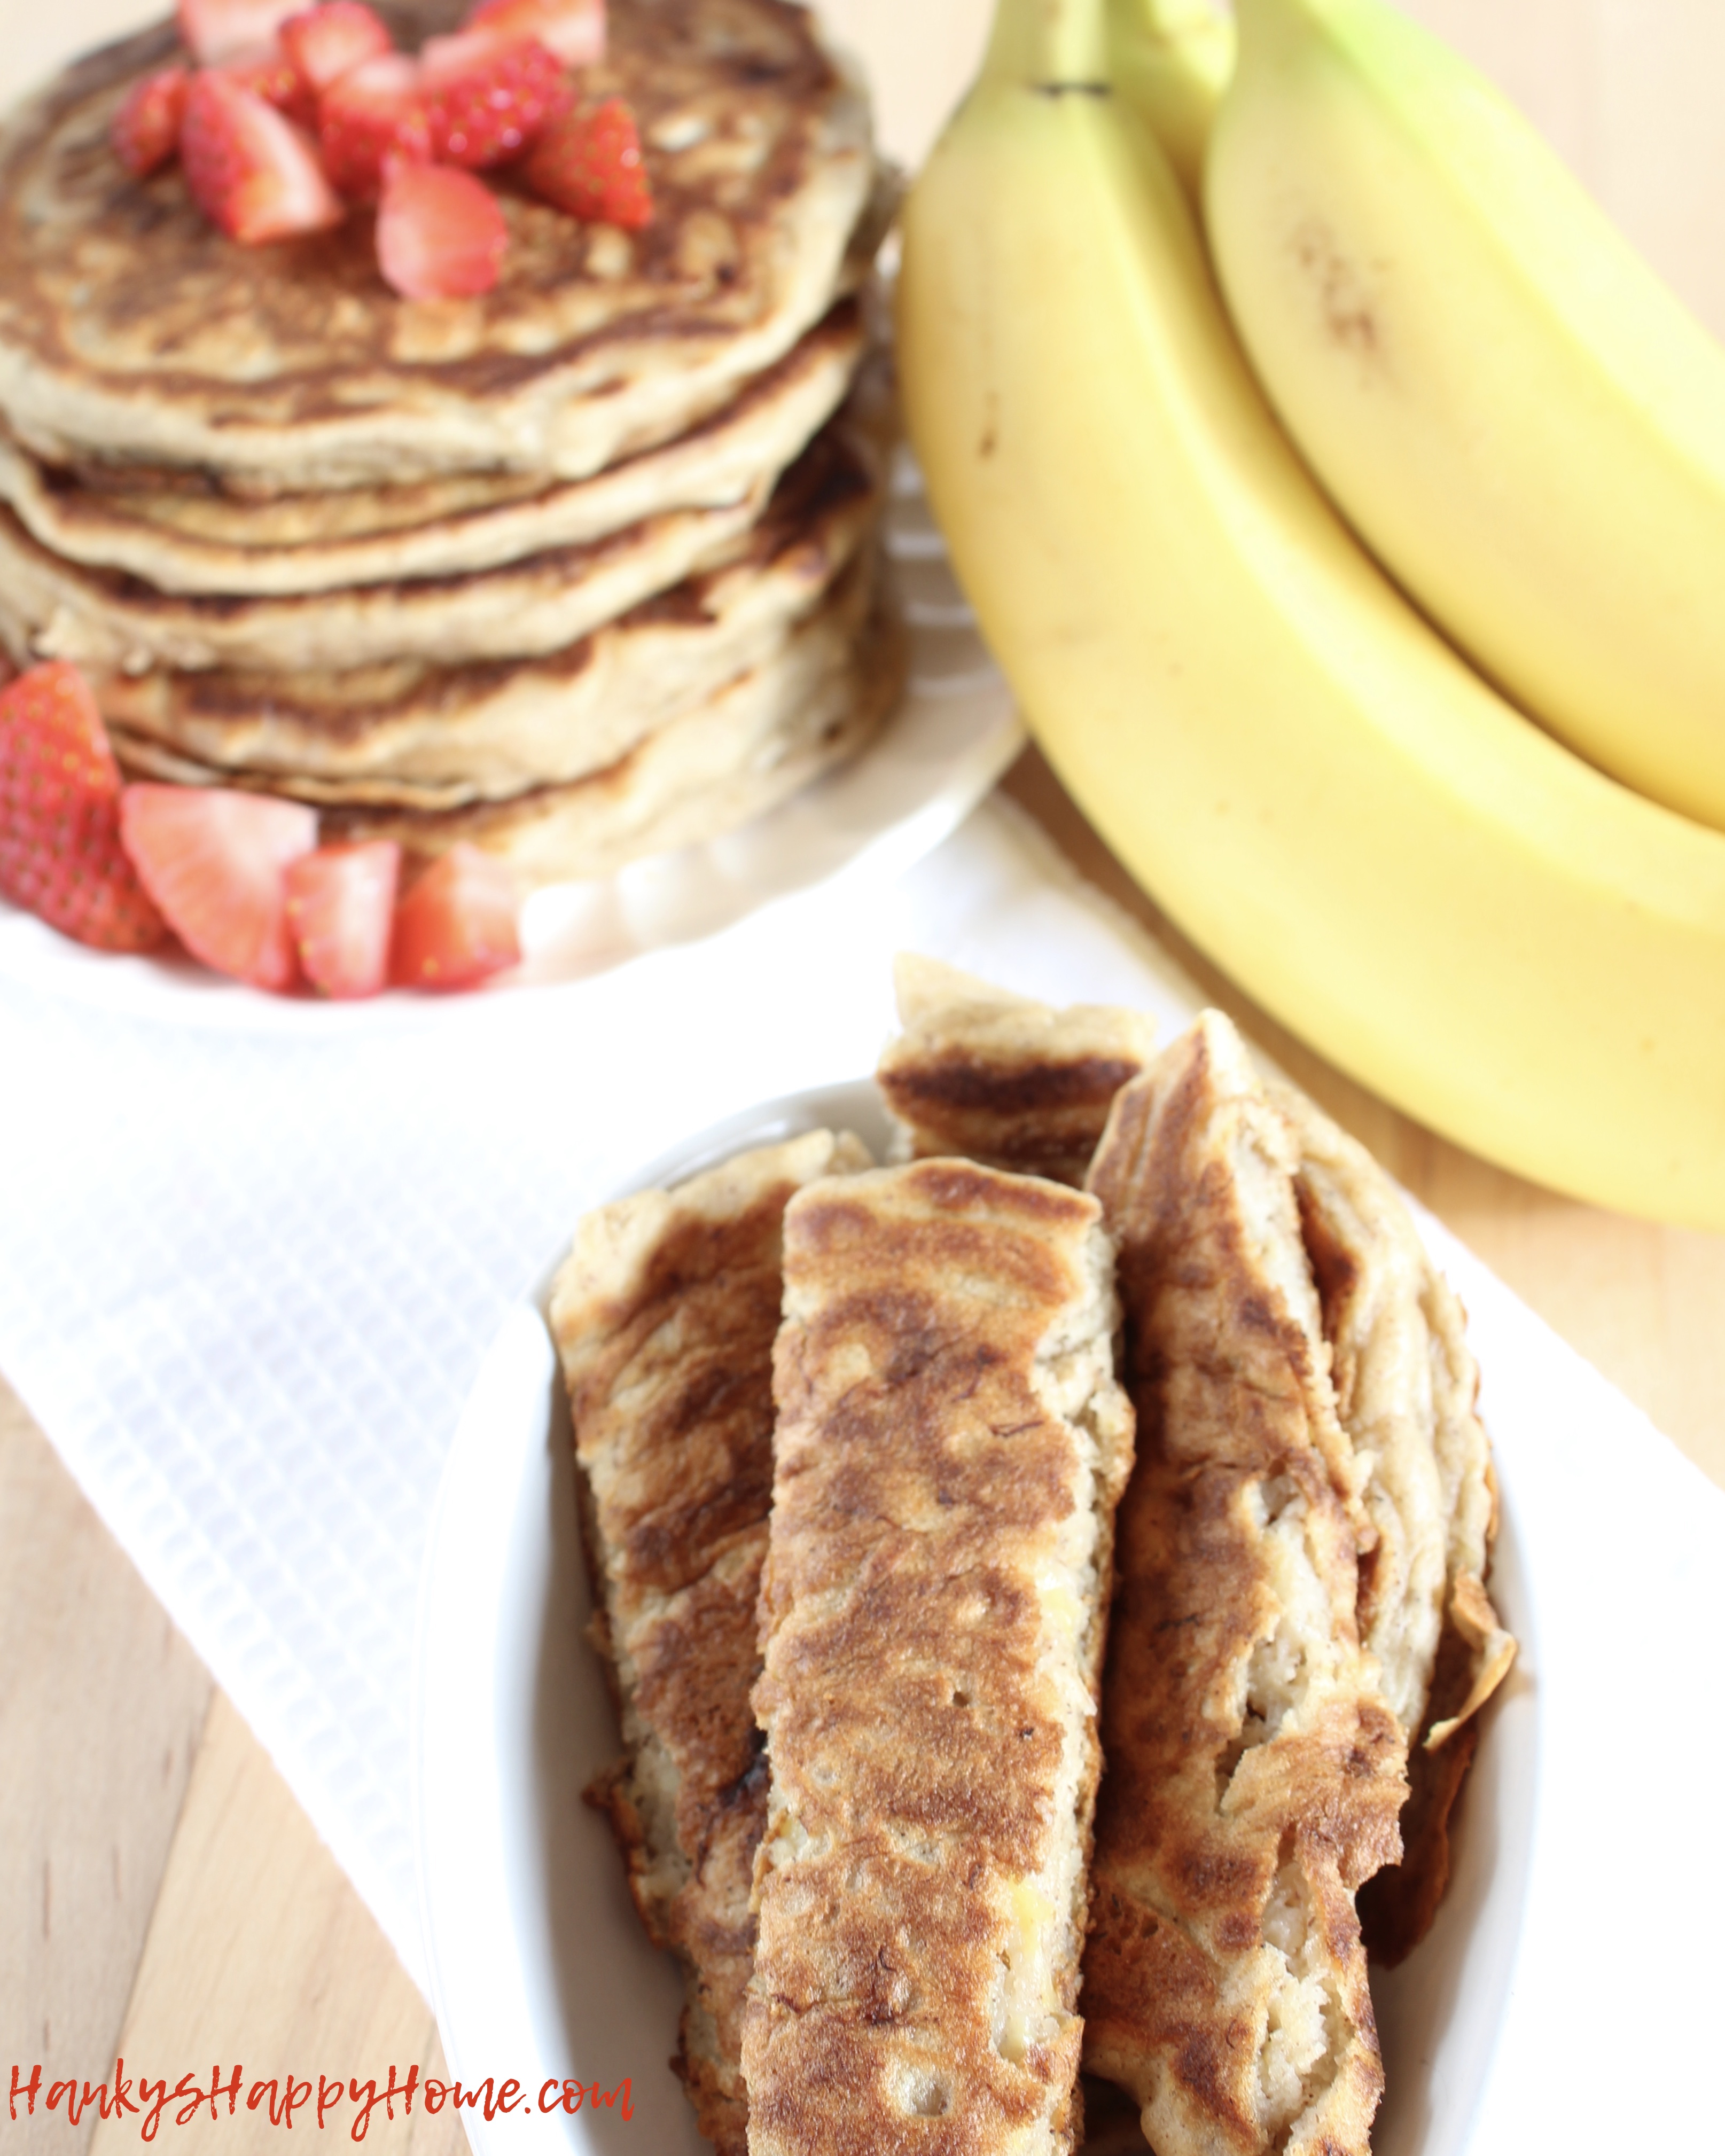 These Banana & Coconut Pancakes combine the sweetness of bananas with the creaminess of coconut milk for a yummy breakfast or sweet treat!